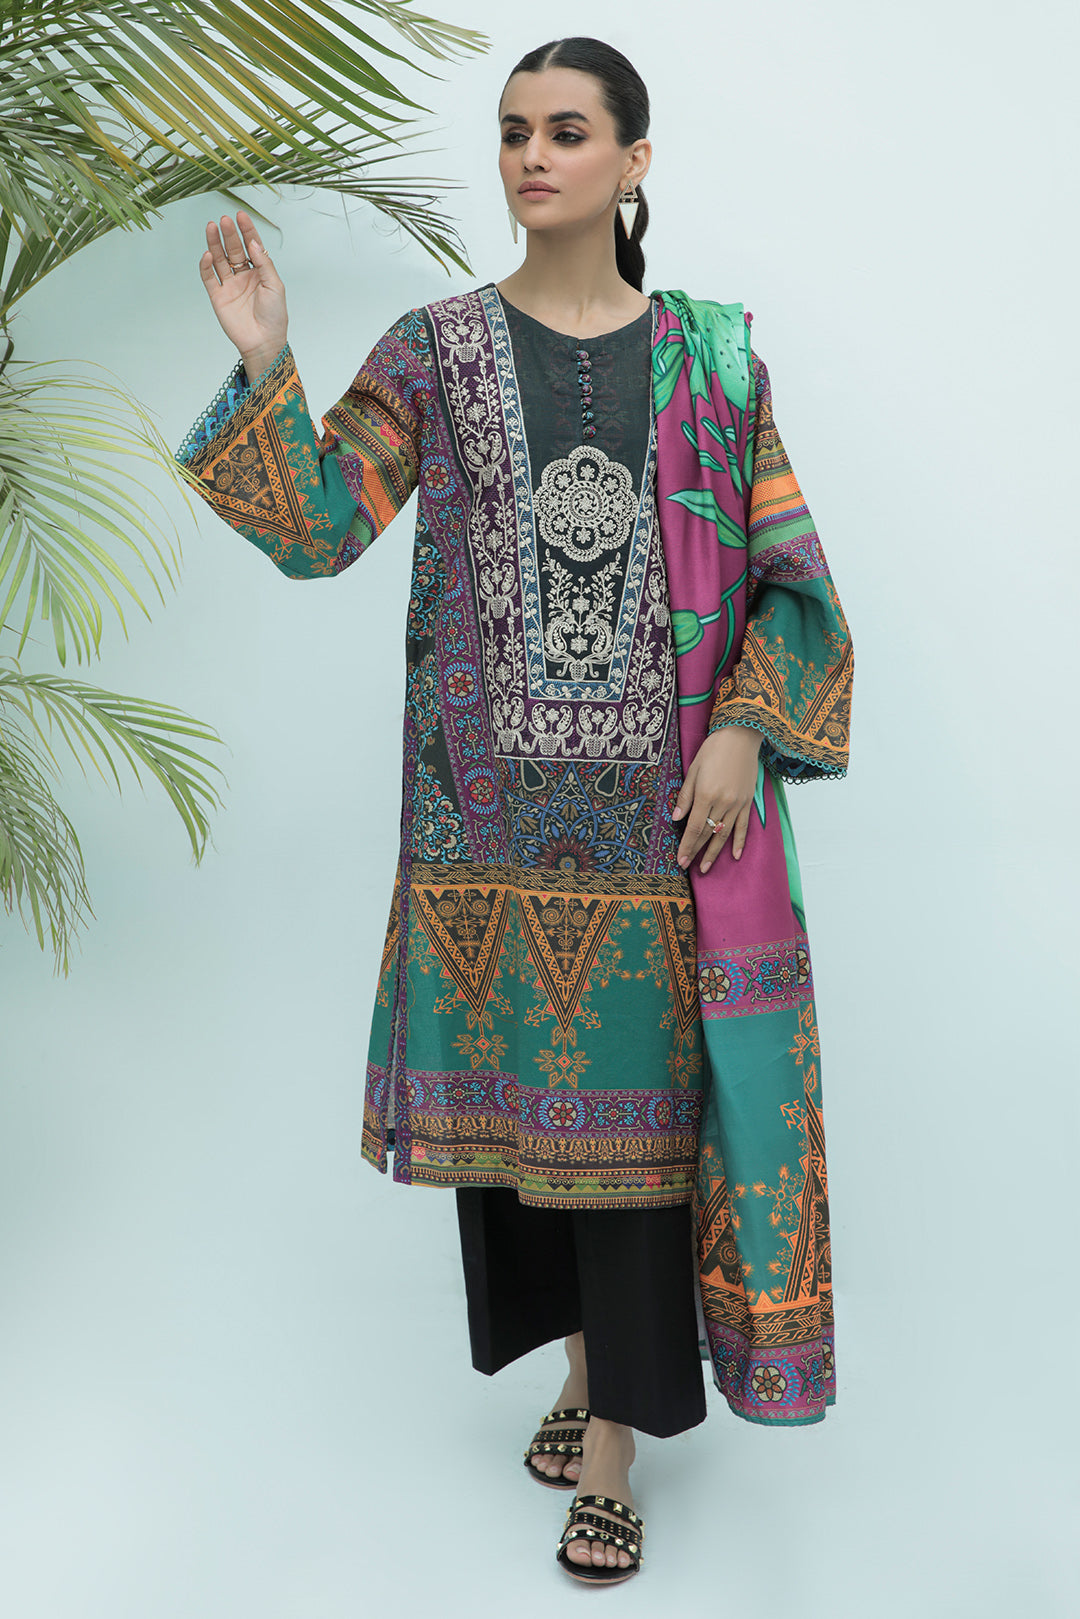 2 Piece - Embroidered Printed Plain Khaddar Suit P0023